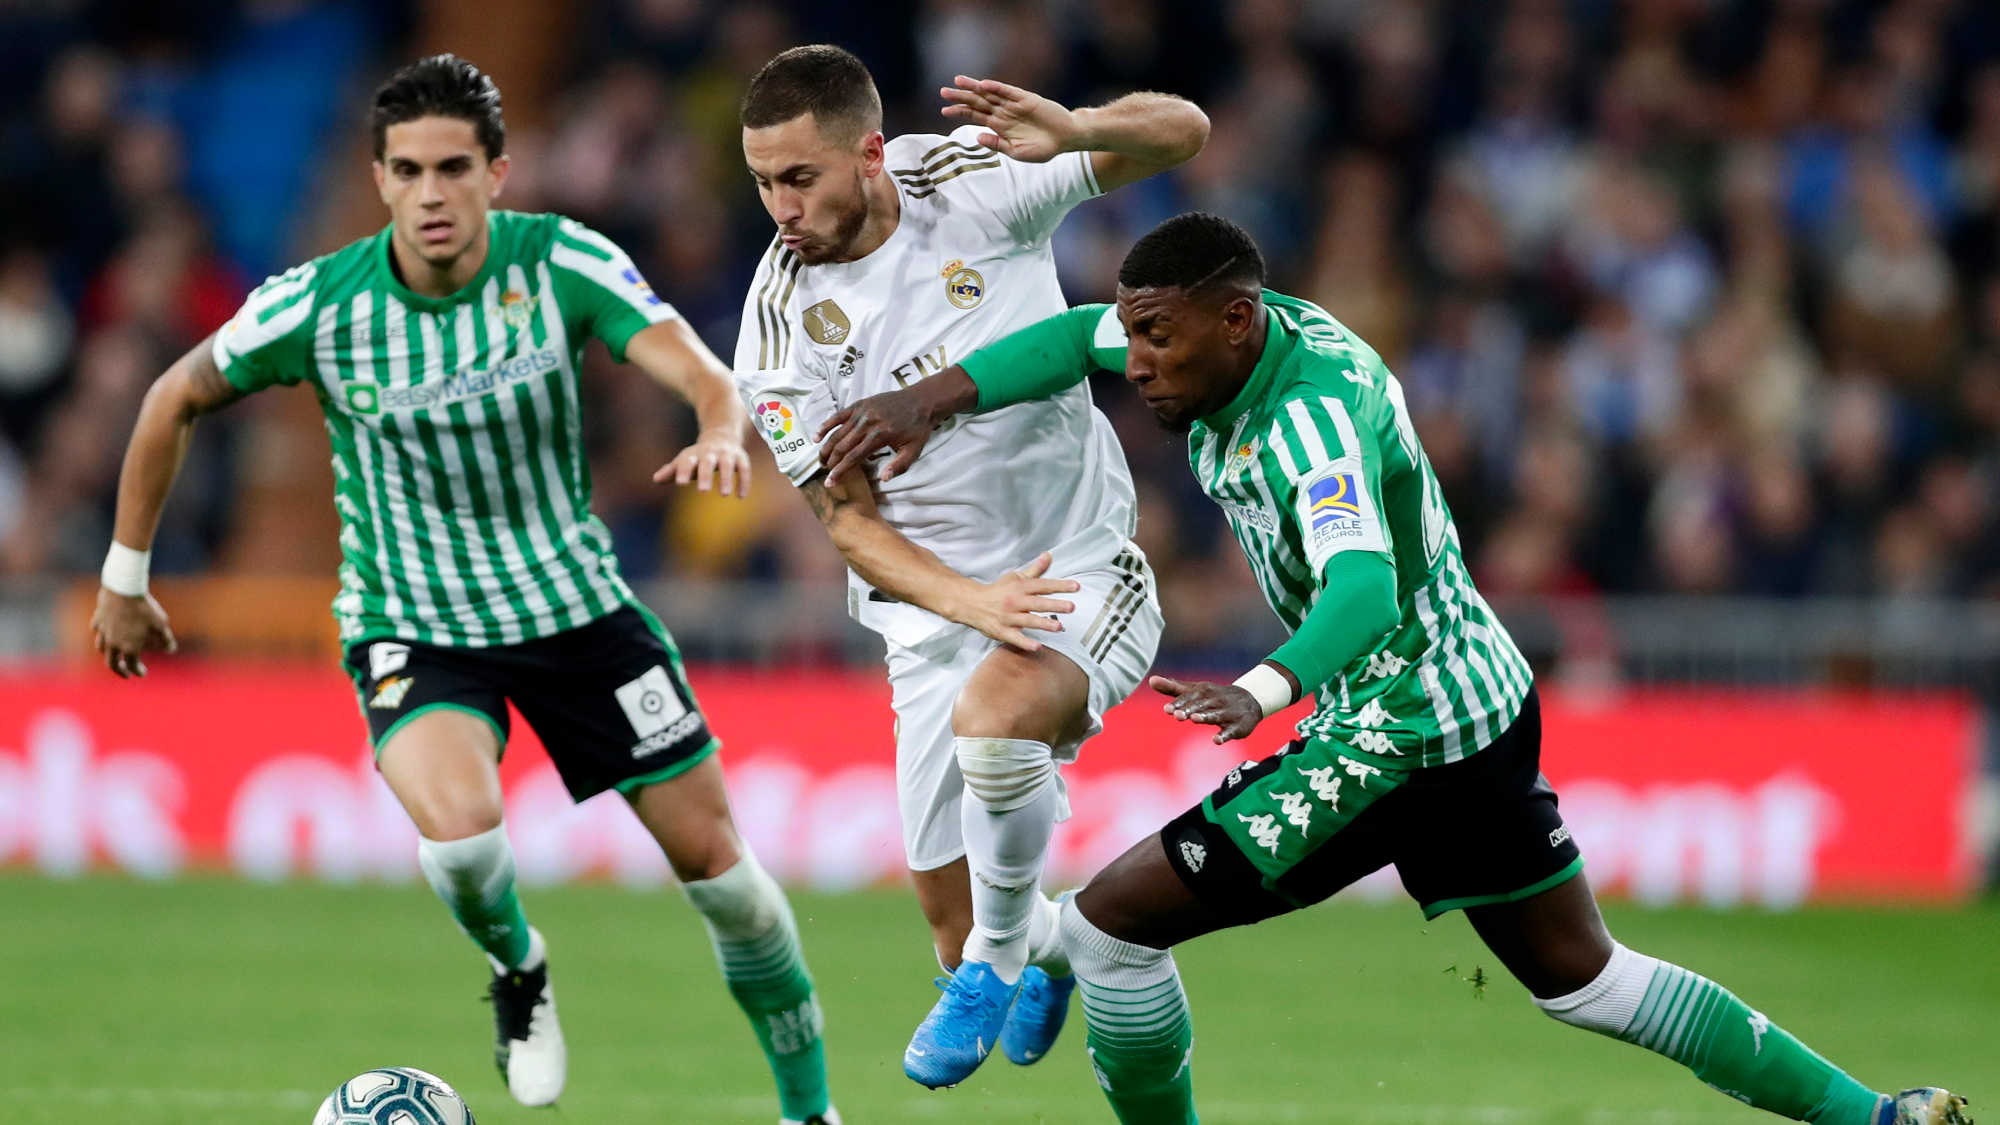 Controversial decision to deny Real Madrid a penalty has VAR under fire yet again